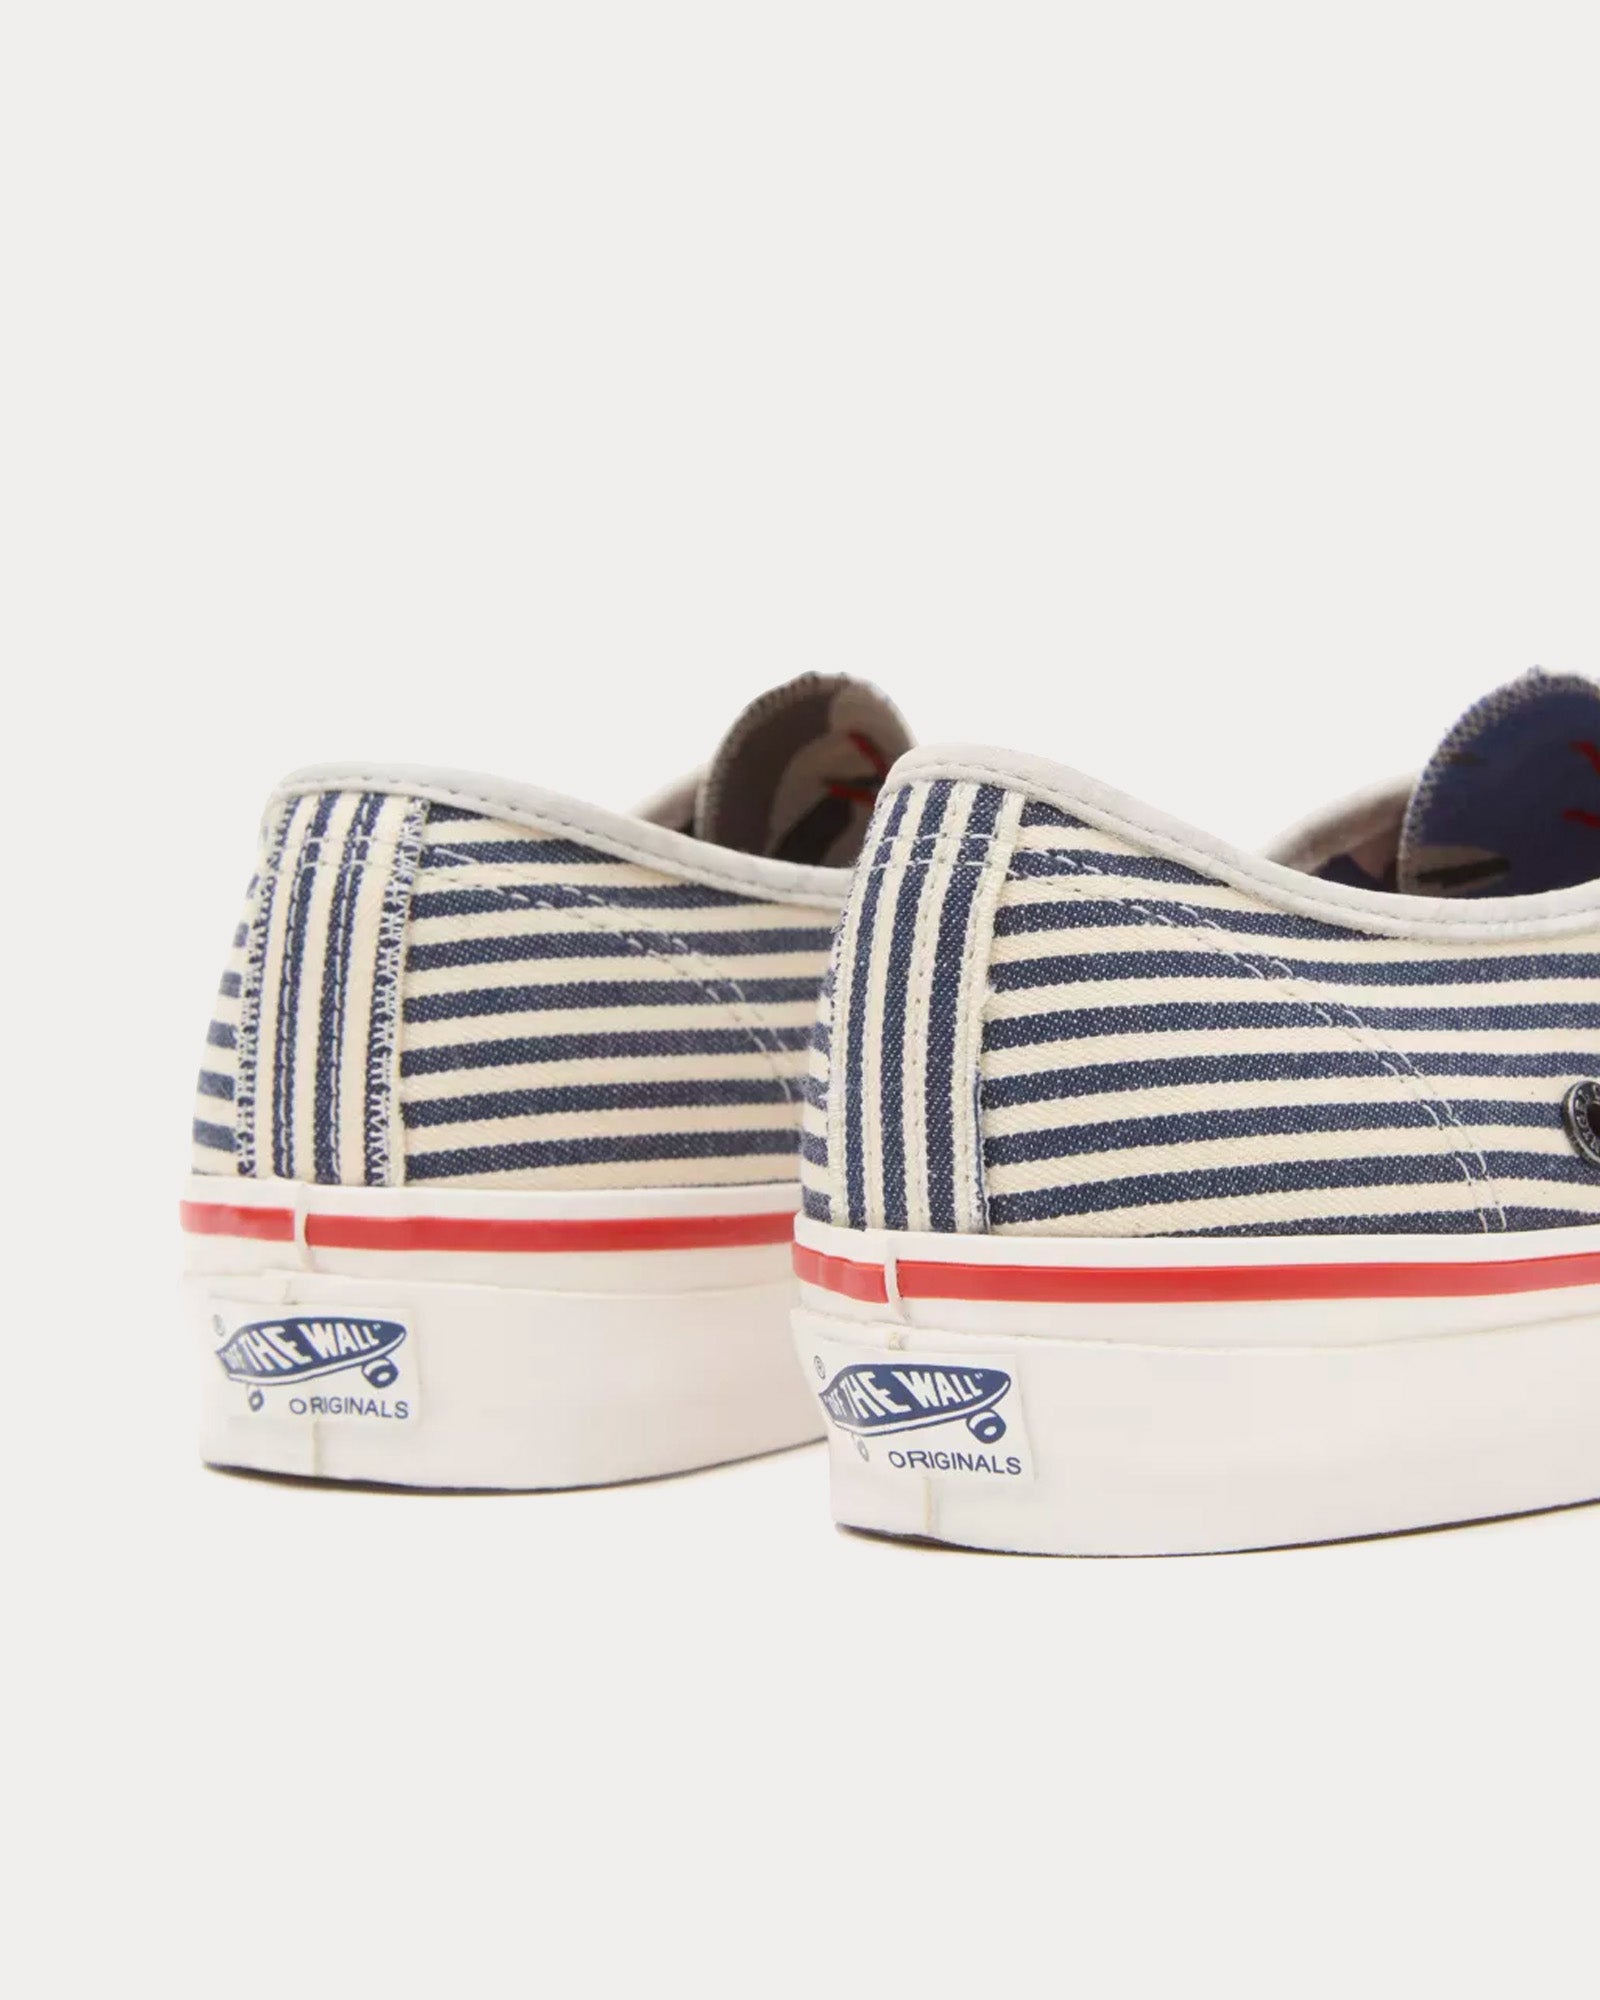 Vans x Nigel Cabourn - OG of Authentic LX Blue / White Low Top Sneakers